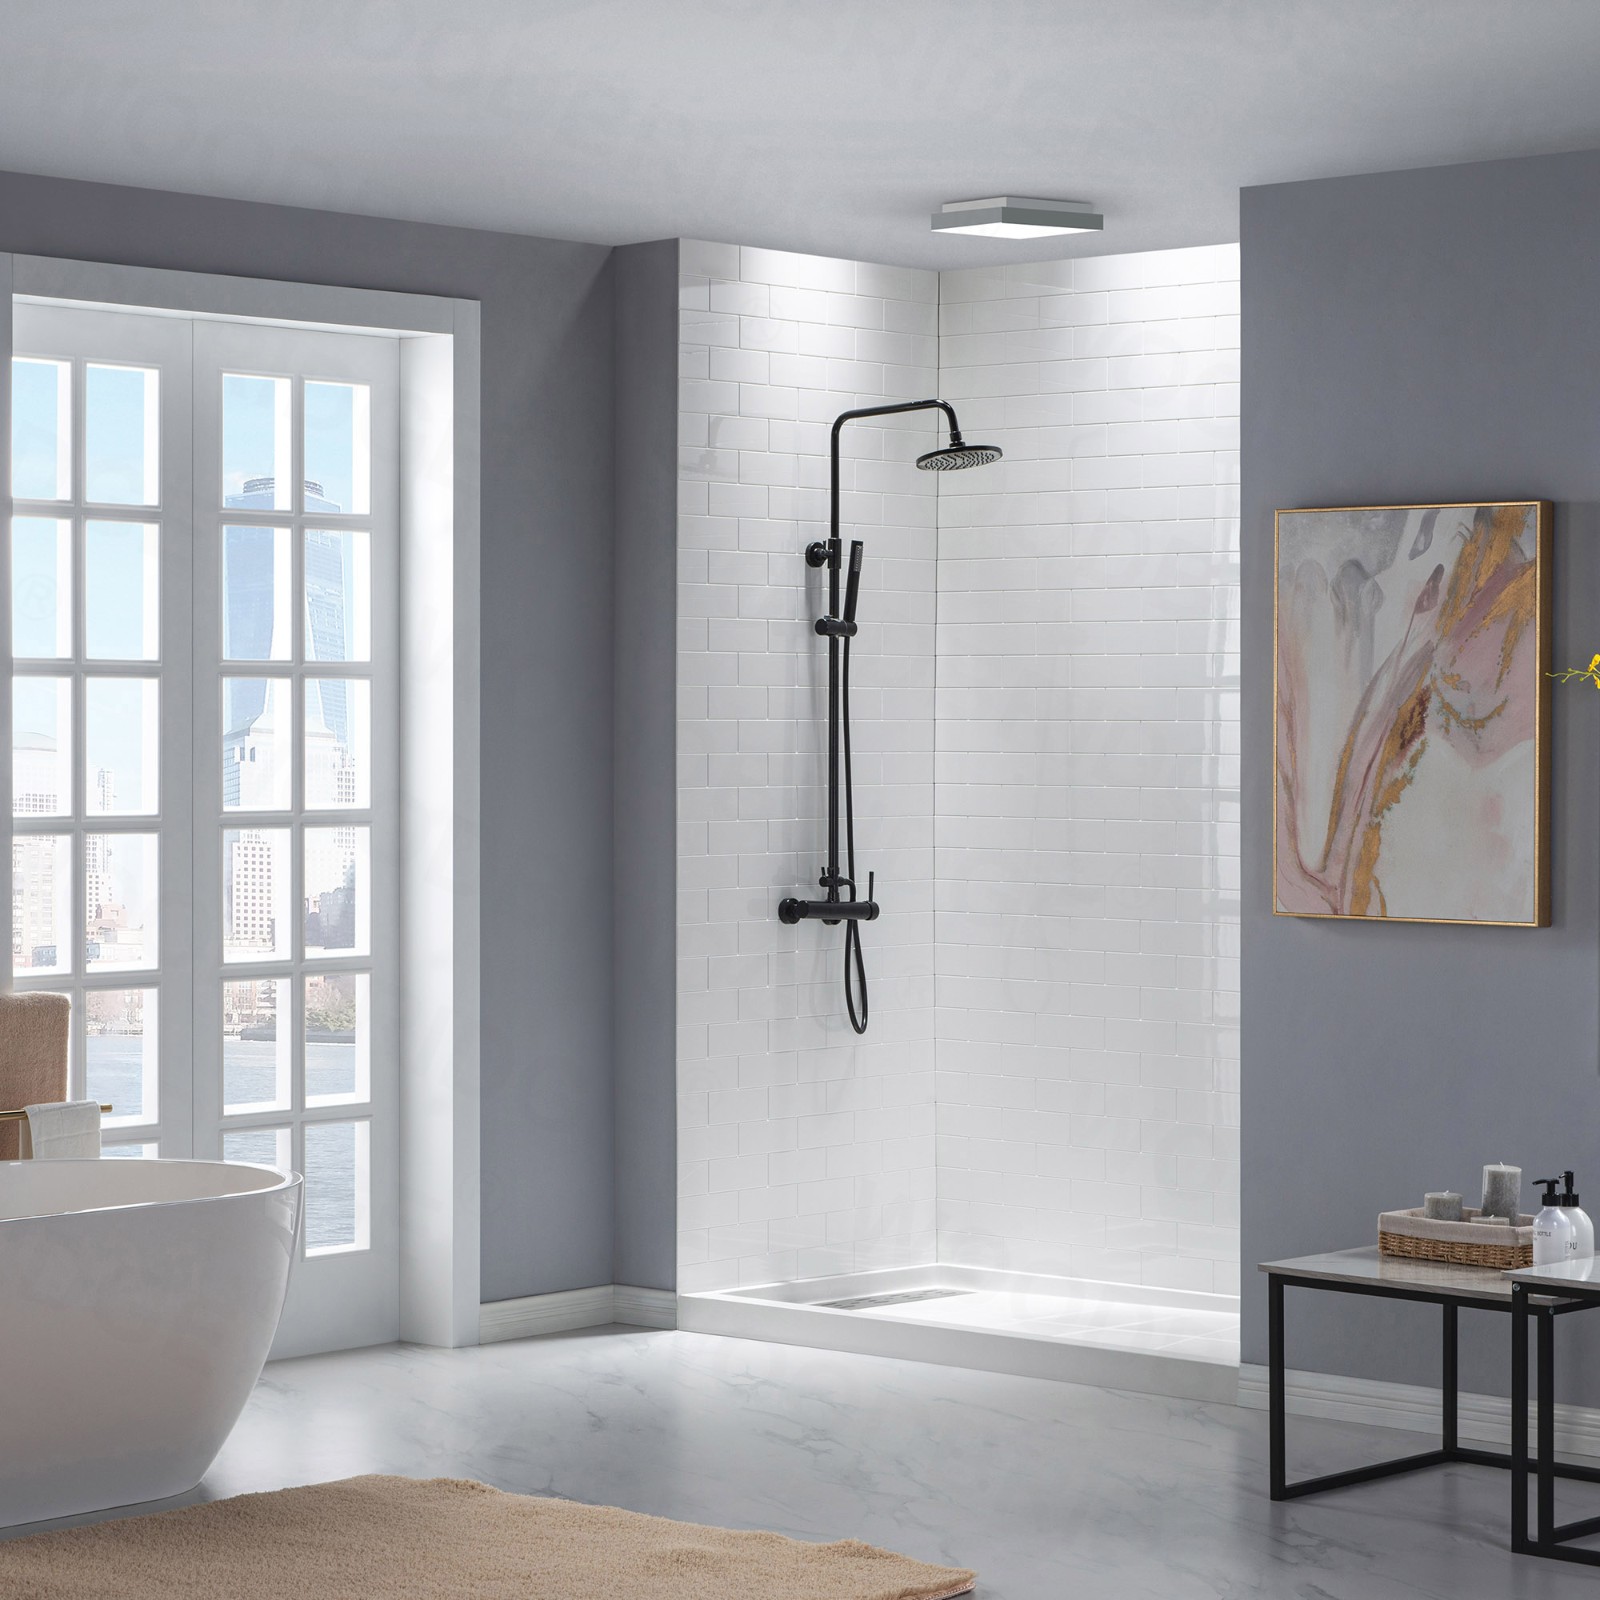  WOODBRIDGE SBR6030-1000L-ORB SolidSurface Shower Base with Recessed Trench Side Including Oil Rubbed Bronze Linear Cover, 60